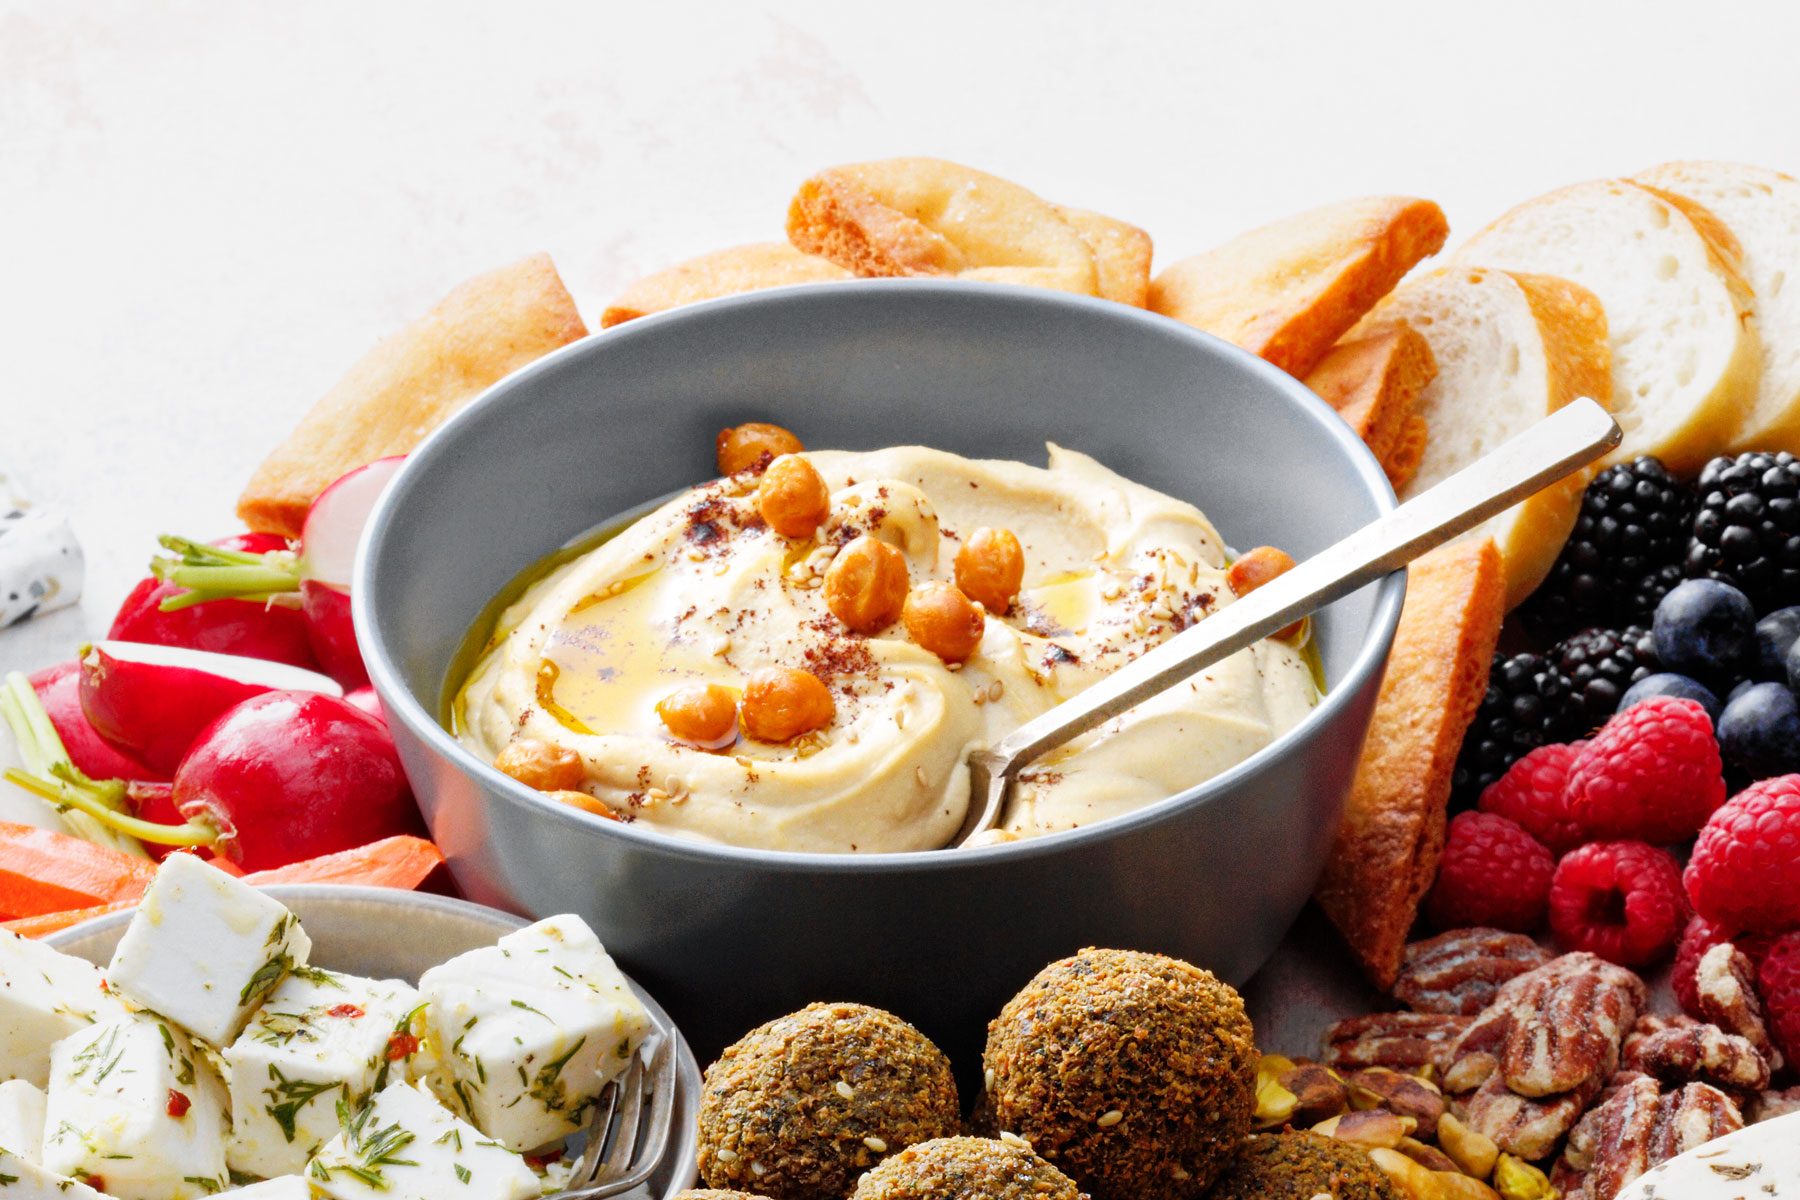 Hummus and other food served together in a large plate